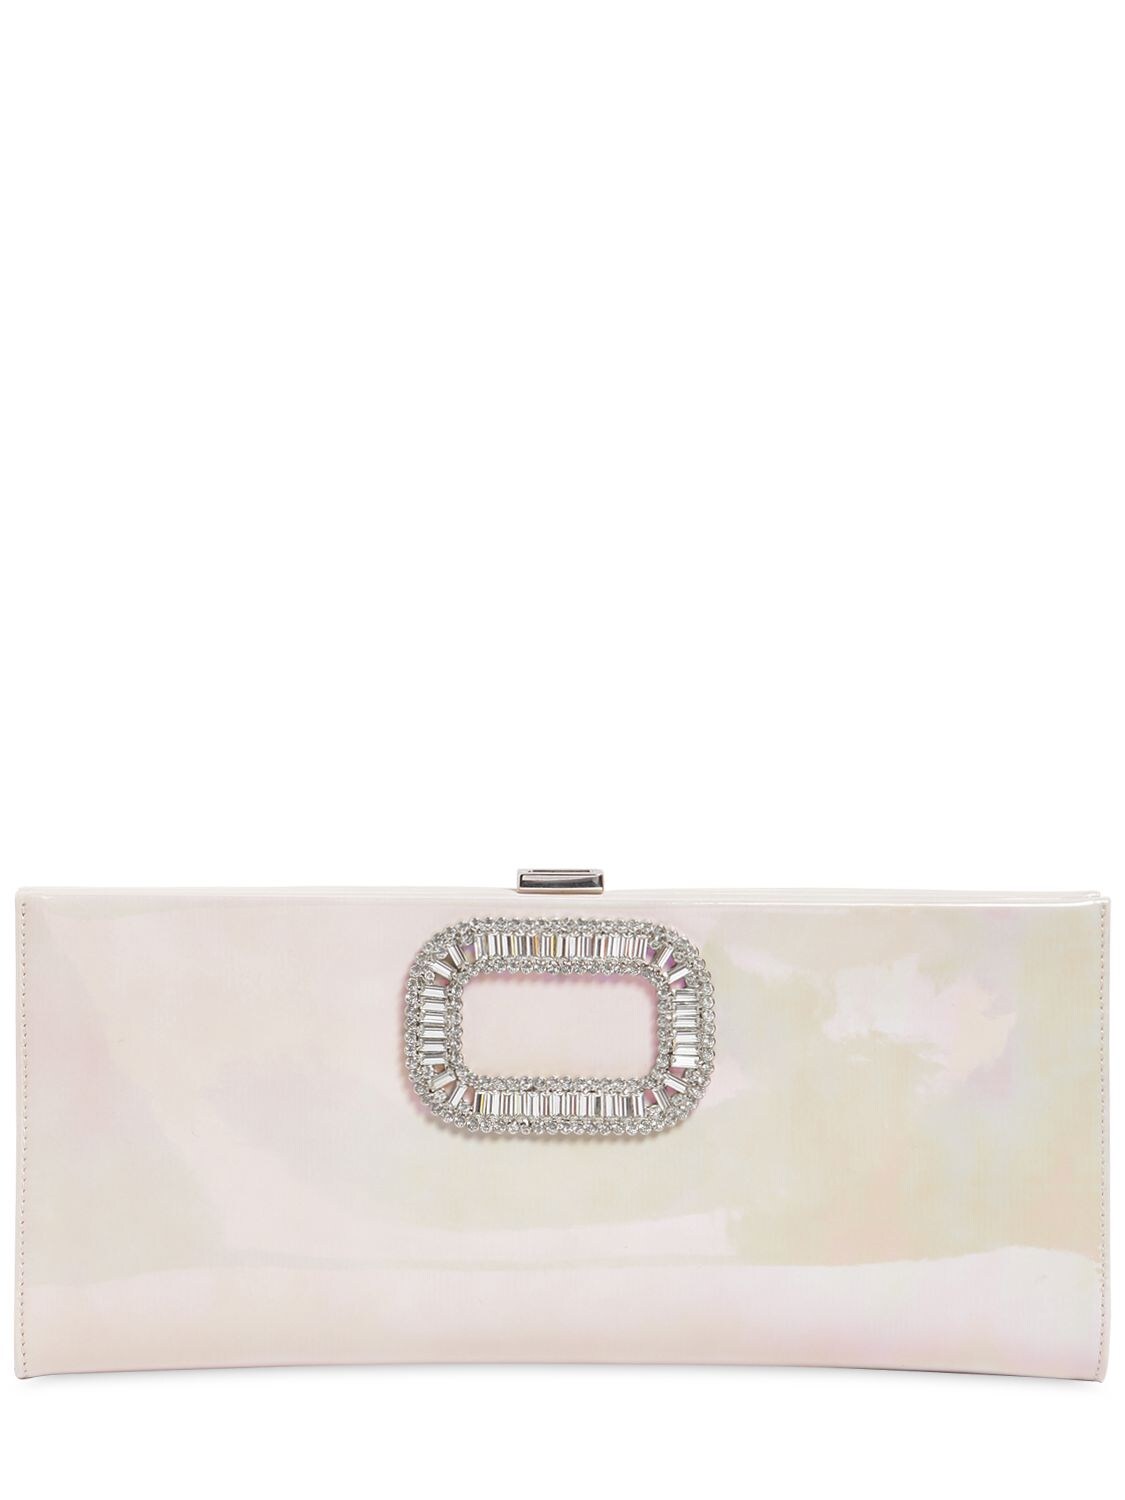 Roger Vivier Pilgrim Patent Leather Clutch In Pink